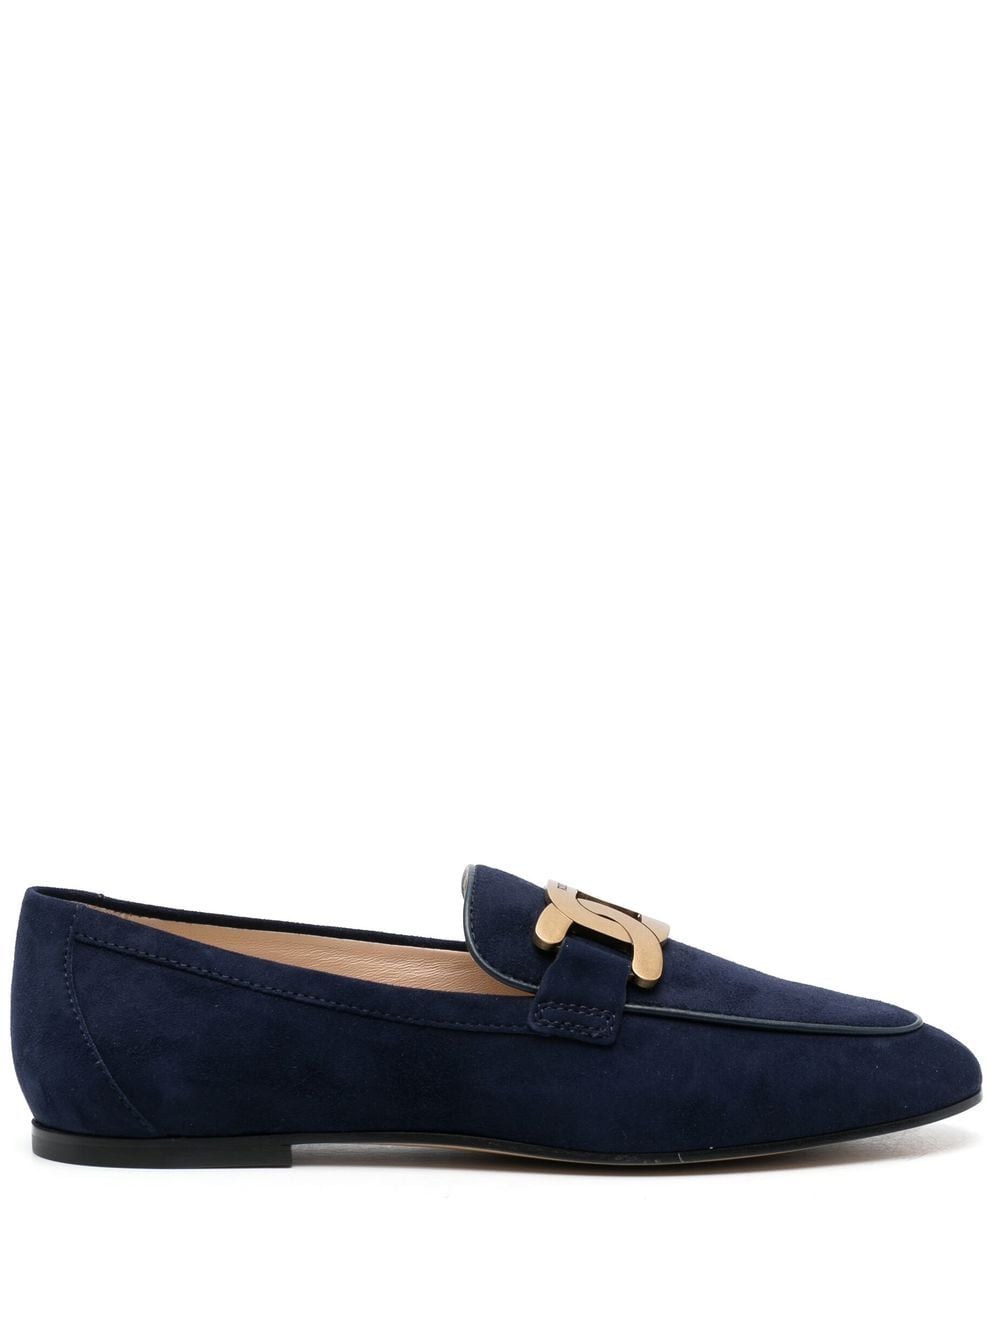 Image 1 of Tod's Kate suede loafers